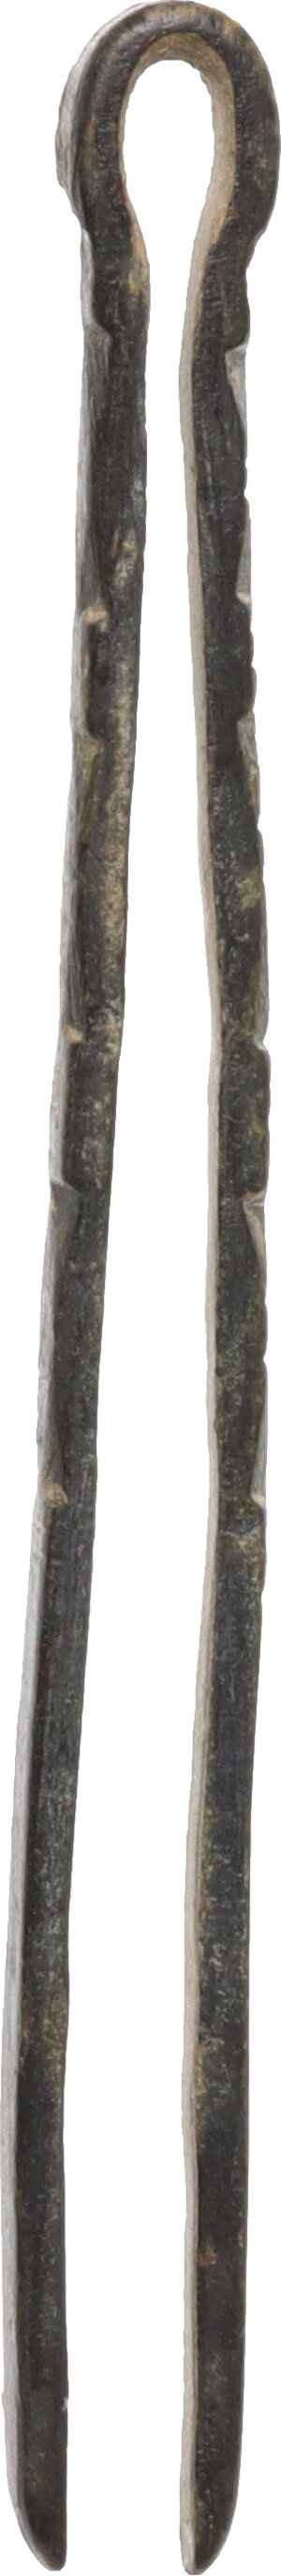 reverse: Bronze tweezers with geometric decorations along the legth of the arms.  Roman, 1st-3rd century AD  Length 63 mm. 4.03 g